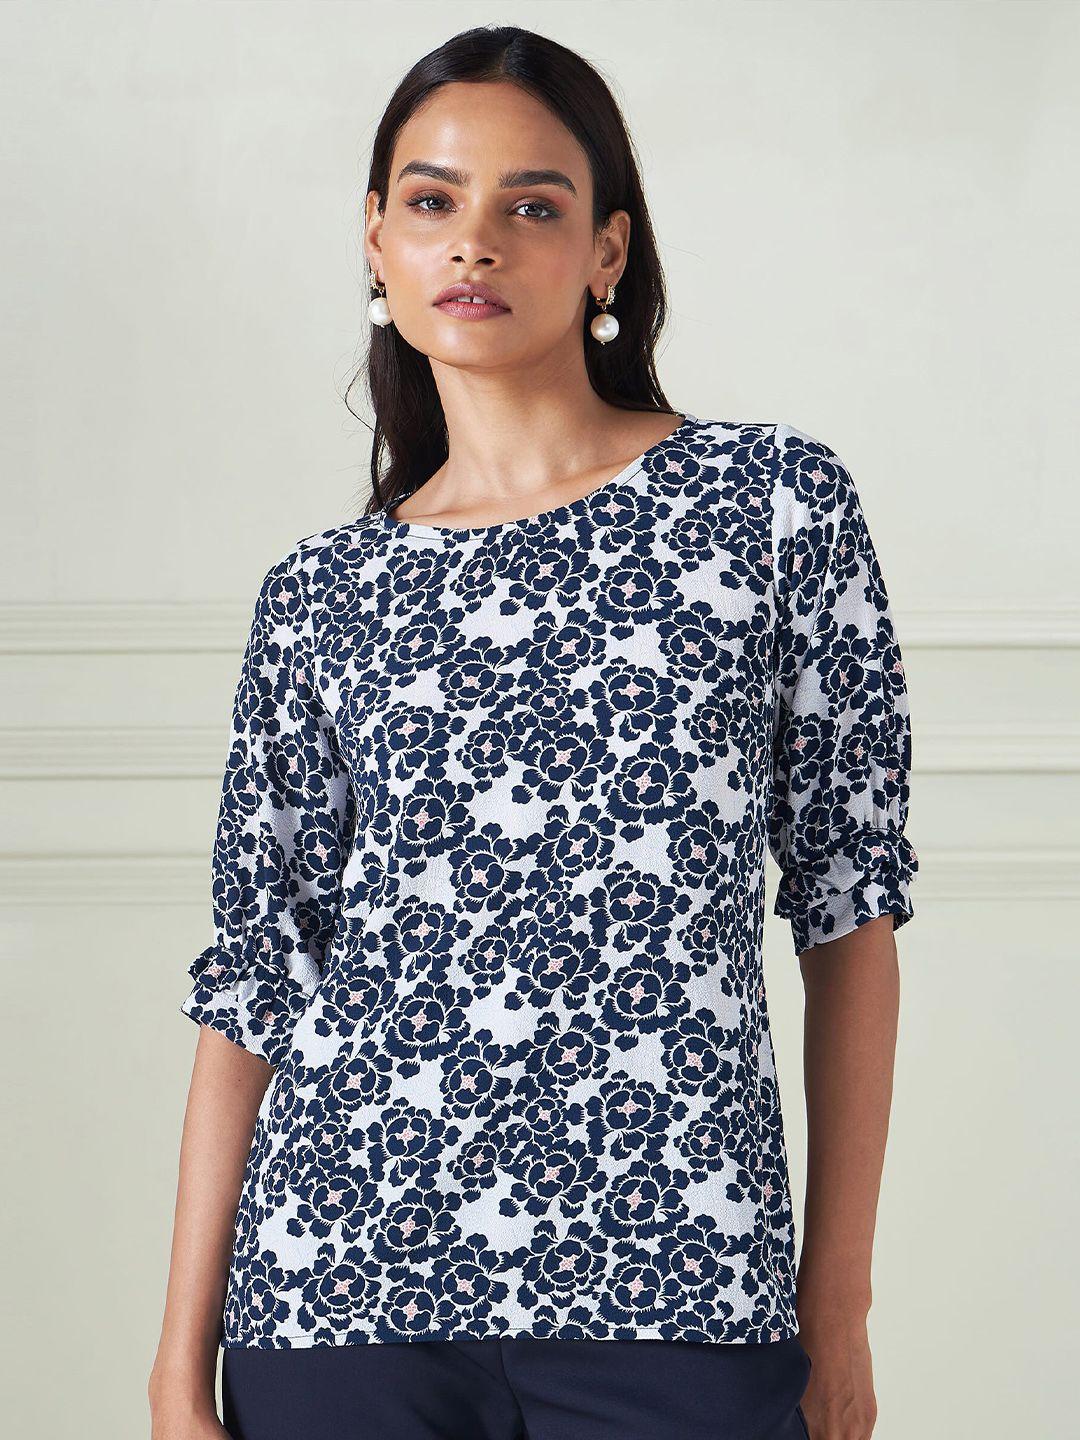 salt attire floral print roll-up sleeves shirt style top